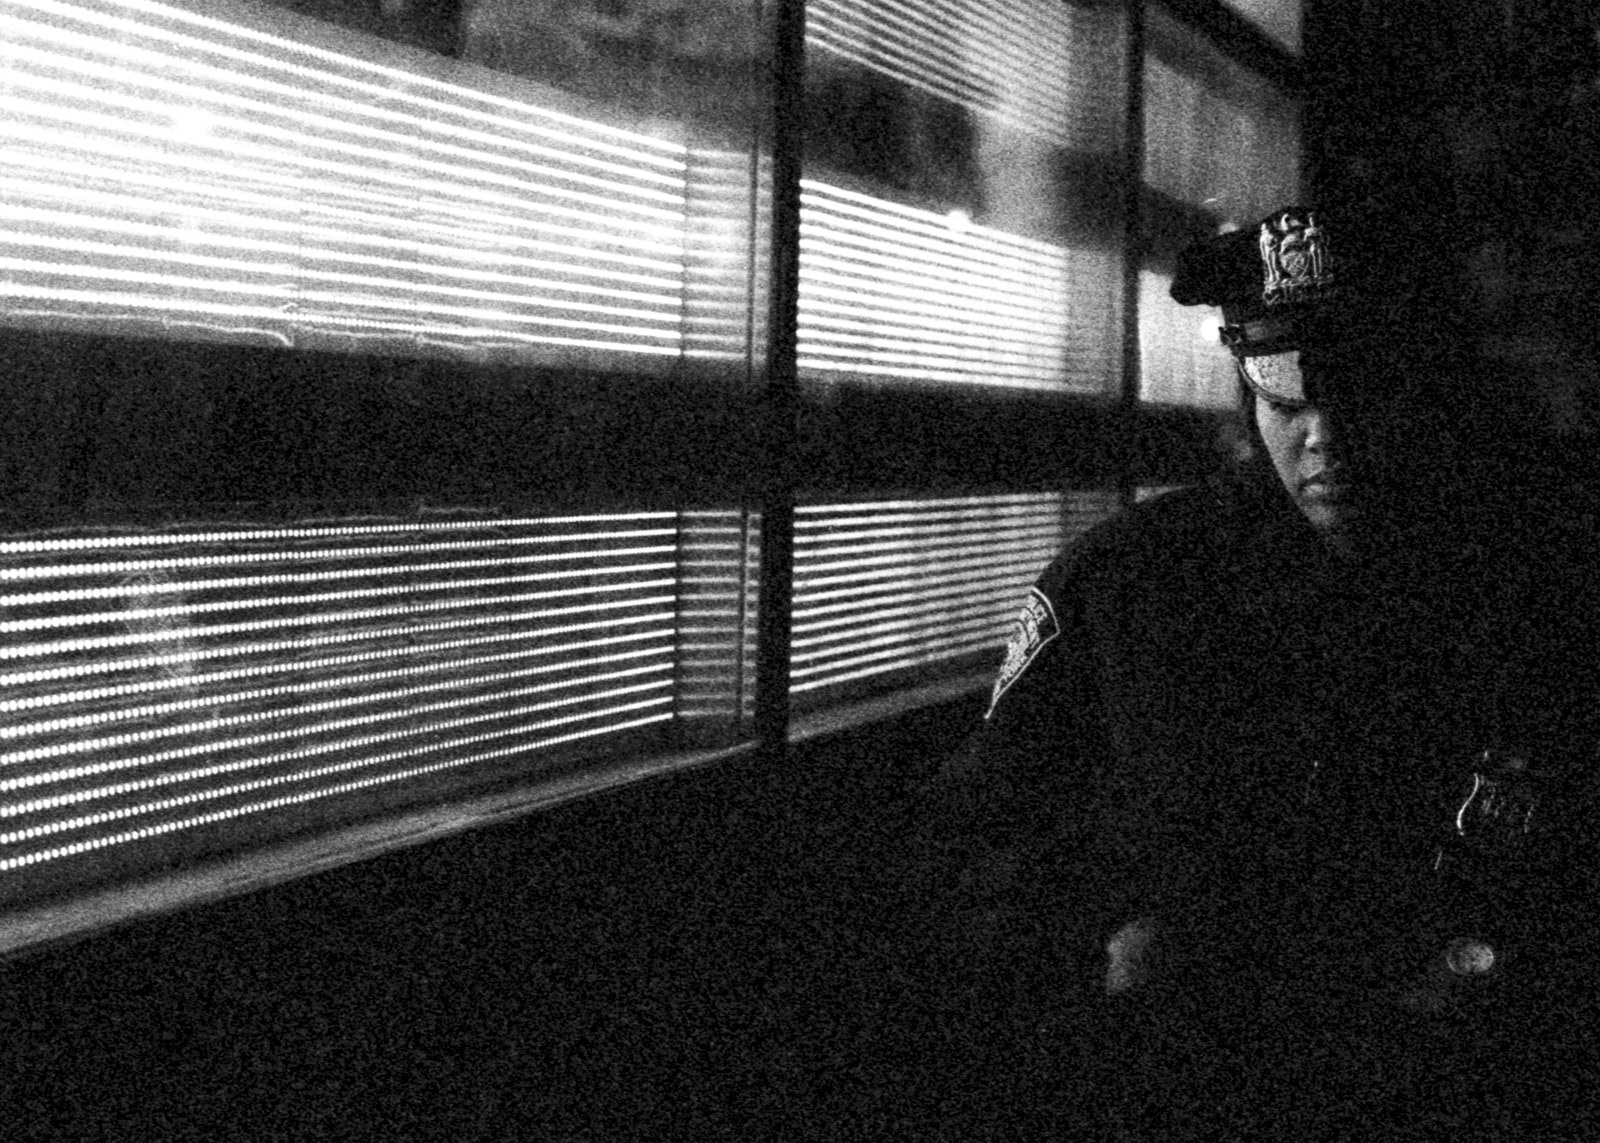 NYPD Officer - New York Street Photography At Night Shot On Ilford Delta 3200 Film